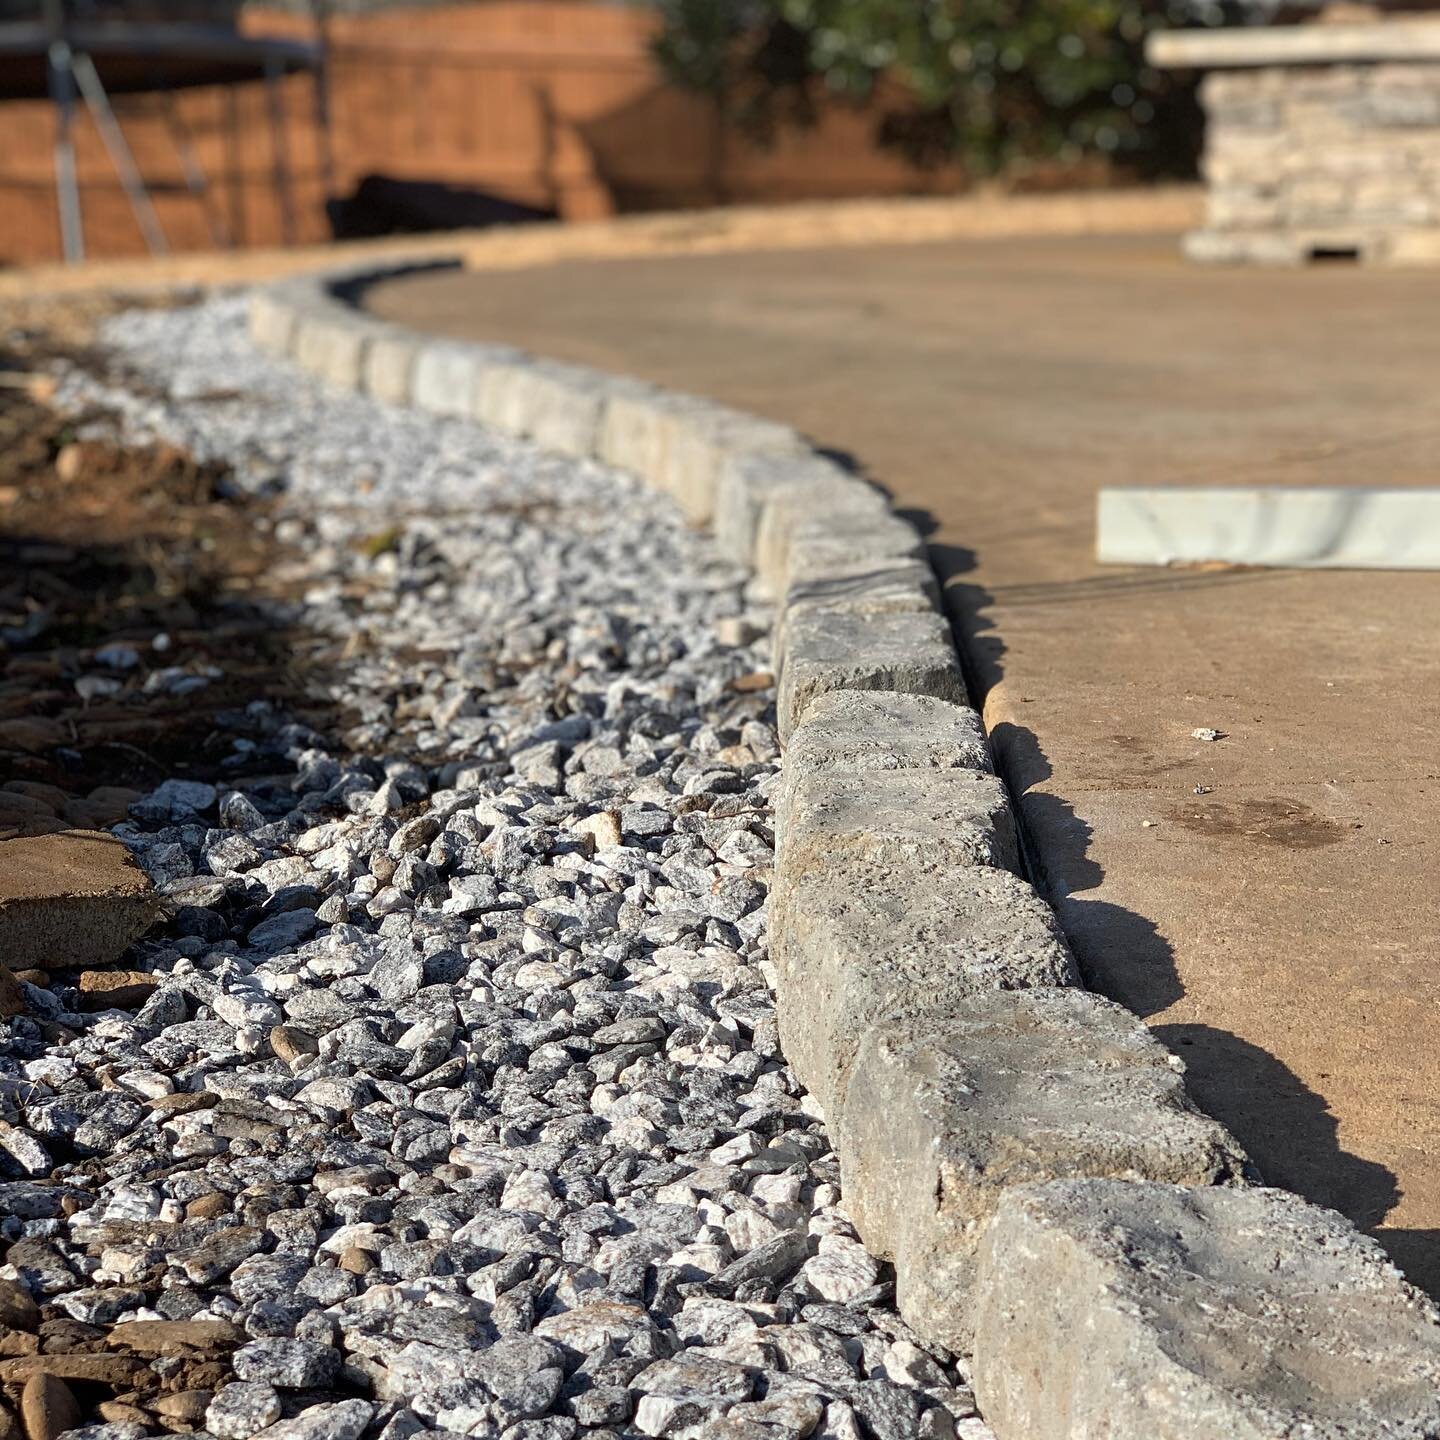 BOARDERS:

Adding a boarder helps keep mulch and dirt in the beds but also adds a nice transition between the concrete and natural areas. Check out these progress shots from a recent boarder install!